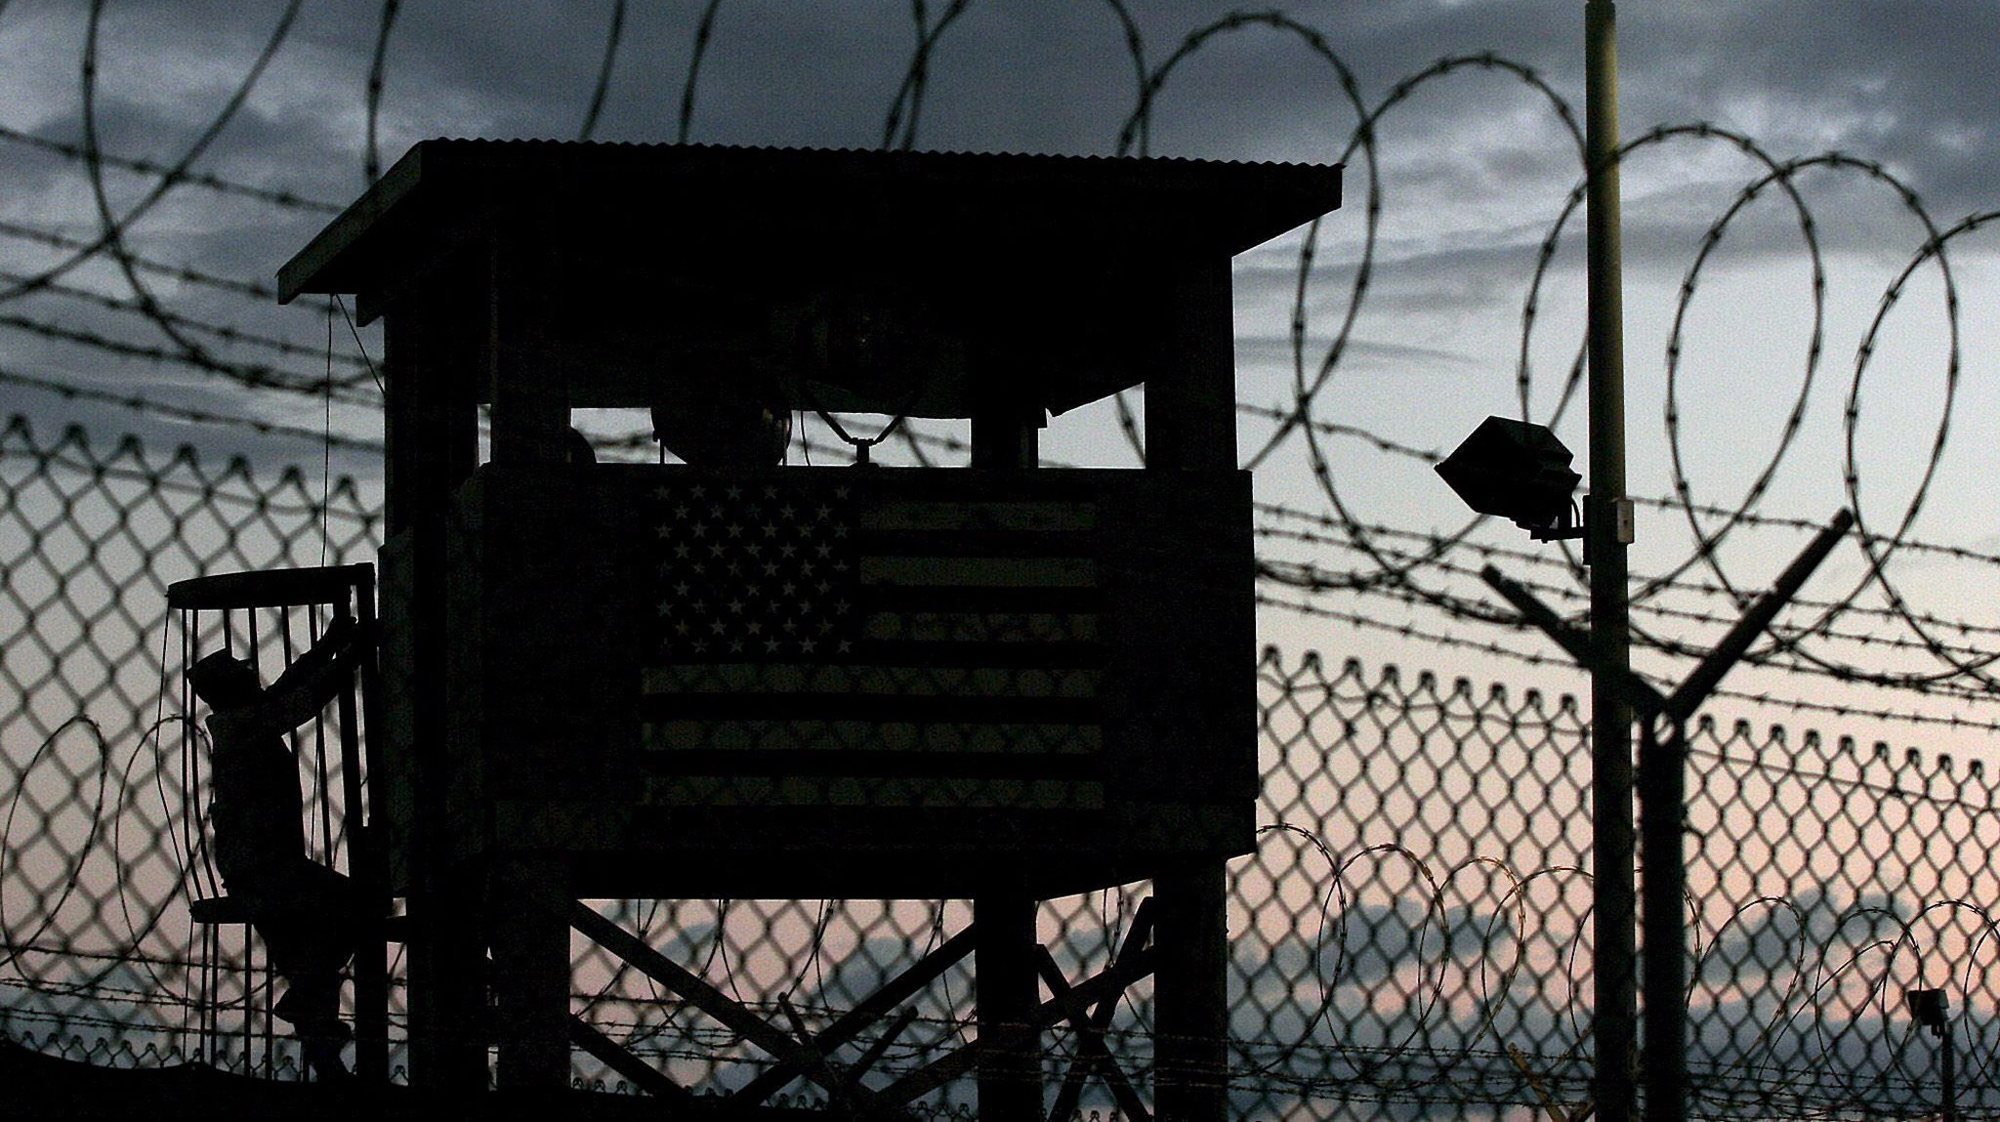 epa05488797 (FILE) A file picture dated 16 February 2006 shows a Joint Task Force member (L, silhouetted) climbing to his guard tower post surrounded by triple rows of razor barbed wire that perimeter the security of Camp Delta, Guantanamo Naval Sation, Cuba. According to media reports on 16 August 2016, the US has sent 15 Guantanamo Bay (GTMO) inmates, 12 Yemenis and three Afghanis, to the United Arab Emirates (UAE). The transfer, the largest under US president Barack Obama&#039;s administration, has brought the total number of prisoners in the US military prison down to 61, media added quoting the Pentagon.  EPA/JOHN RILEY